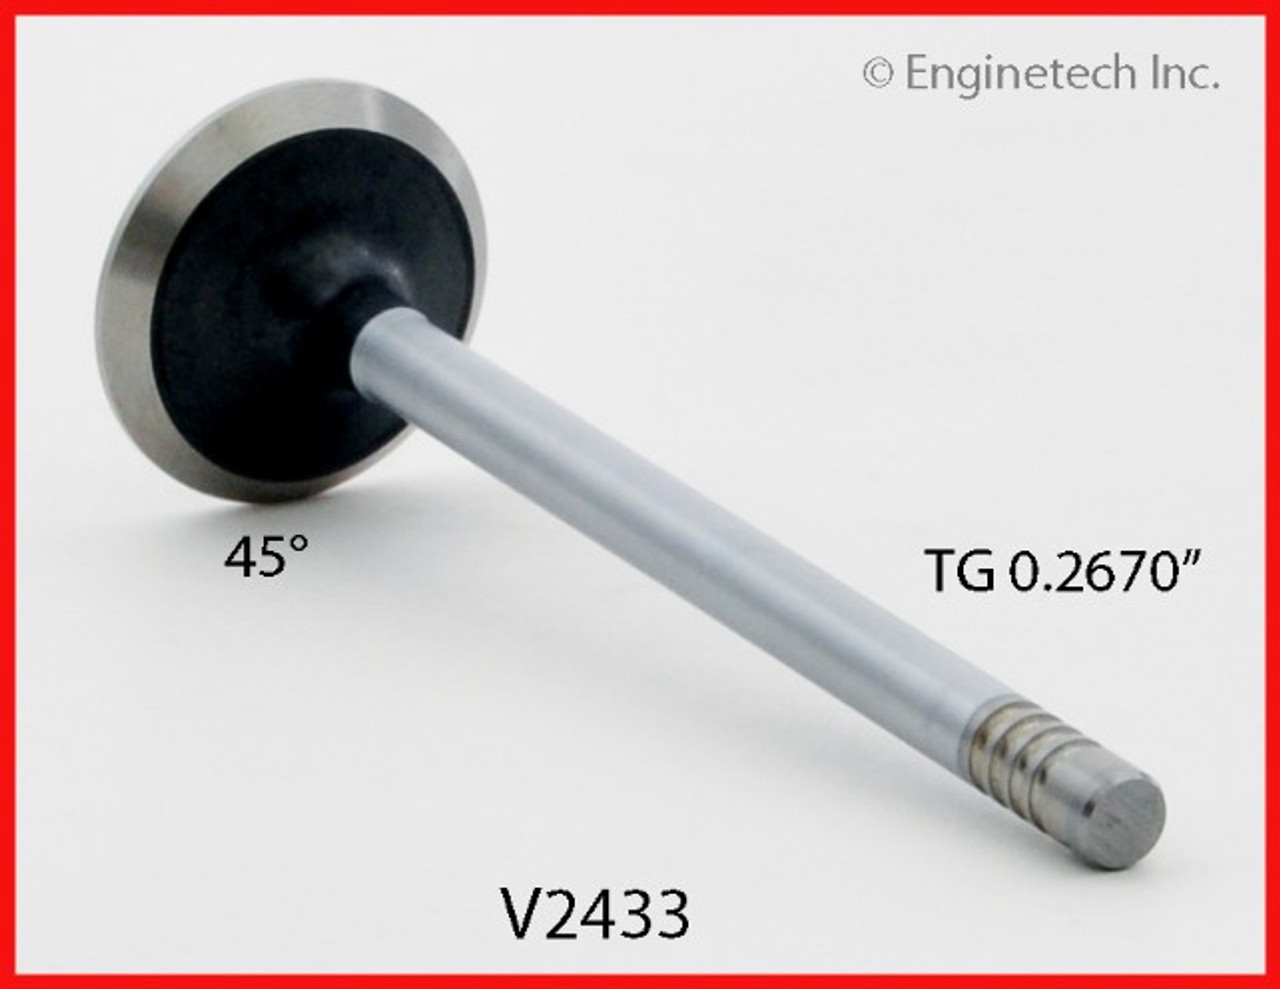 Exhaust Valve - 1991 Plymouth Grand Voyager 3.3L (V2433.B16)